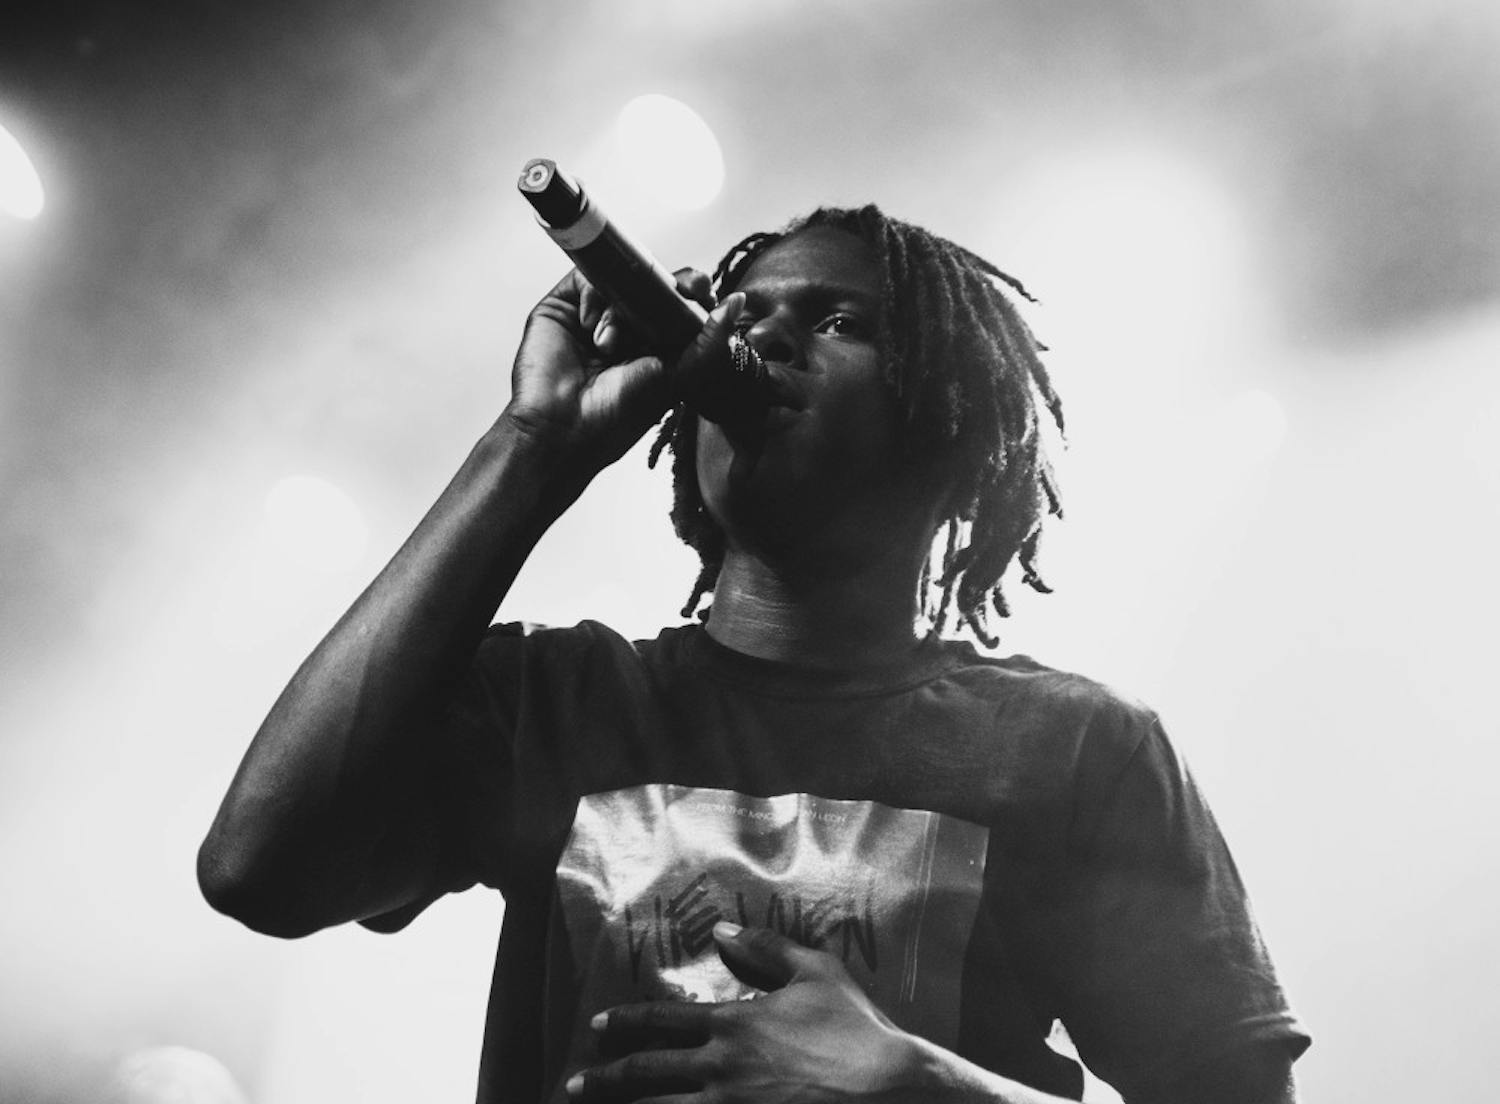 R&B singer Daniel Caesar will open SA's Spring Fest on May 5. SA will announce headliners on Thursday and Friday.